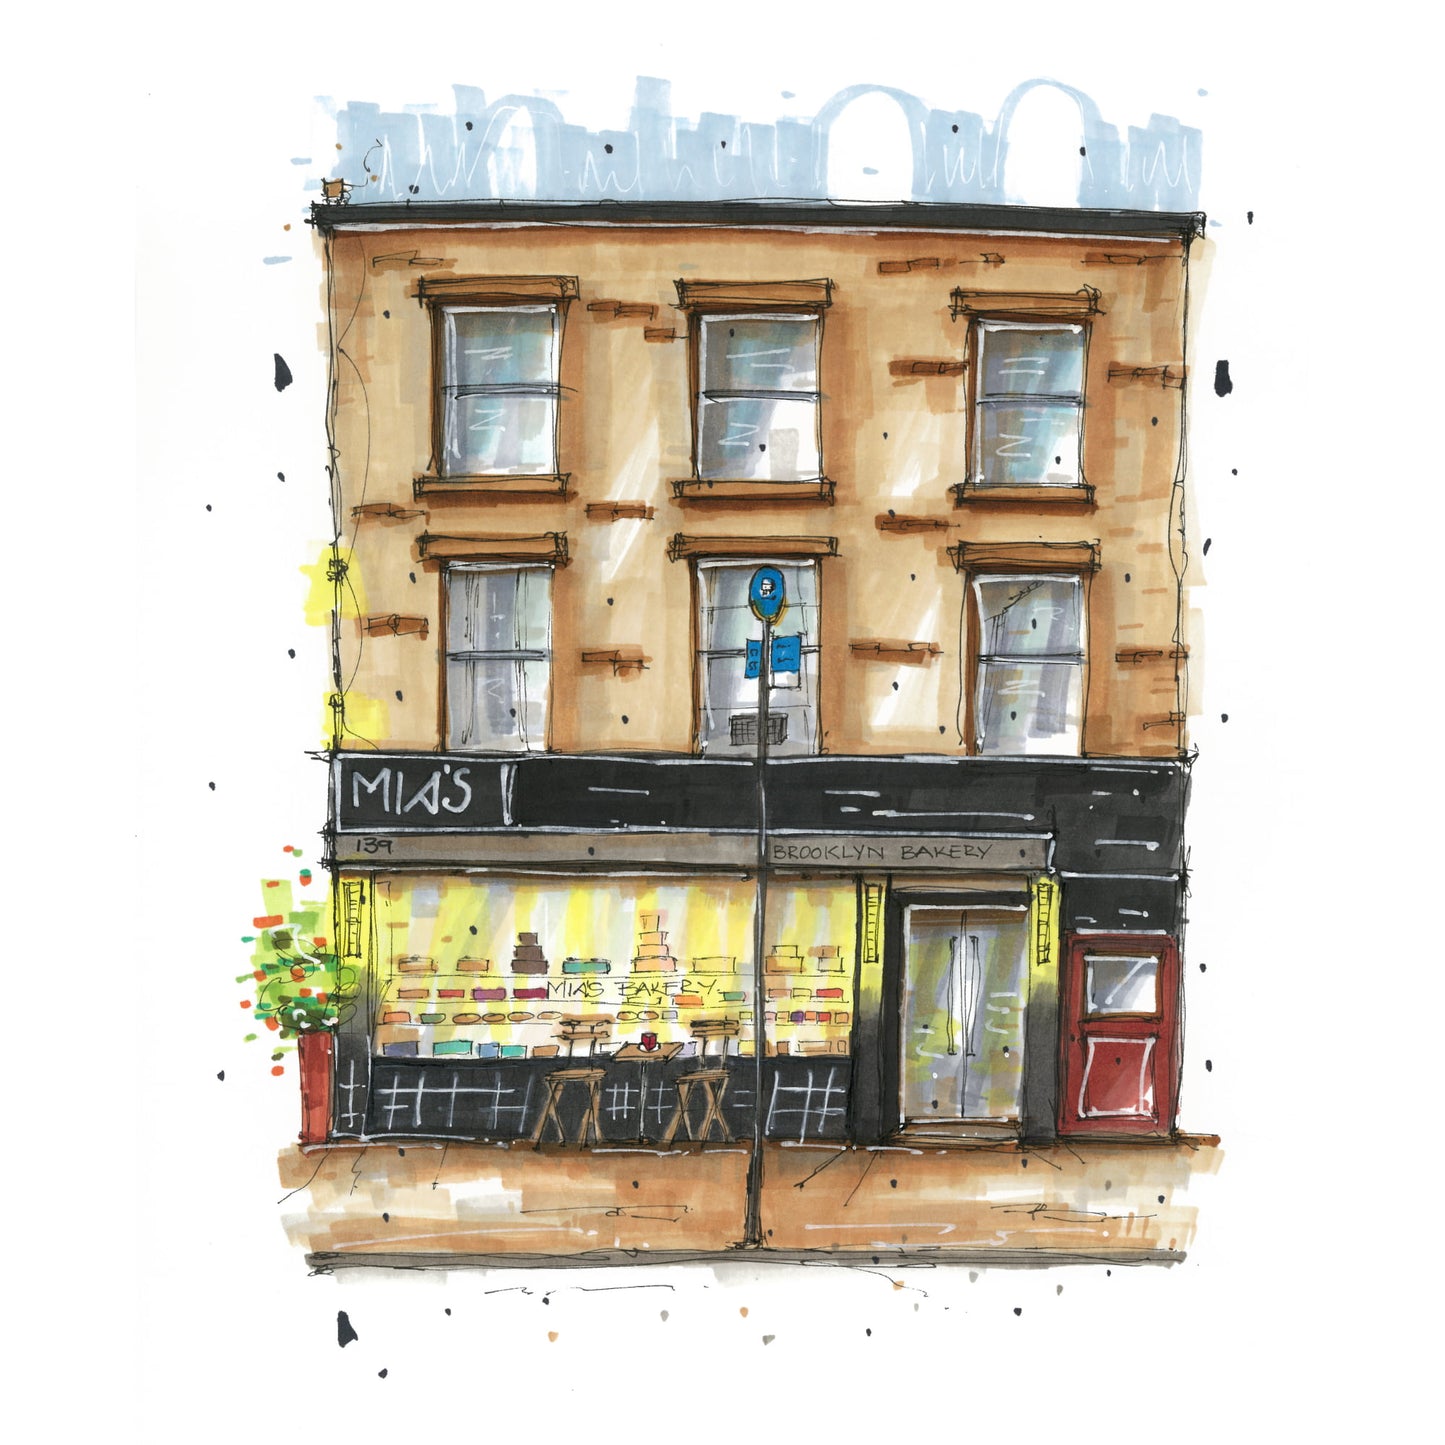 Mia's Brooklyn Bakery Storefront Sketch